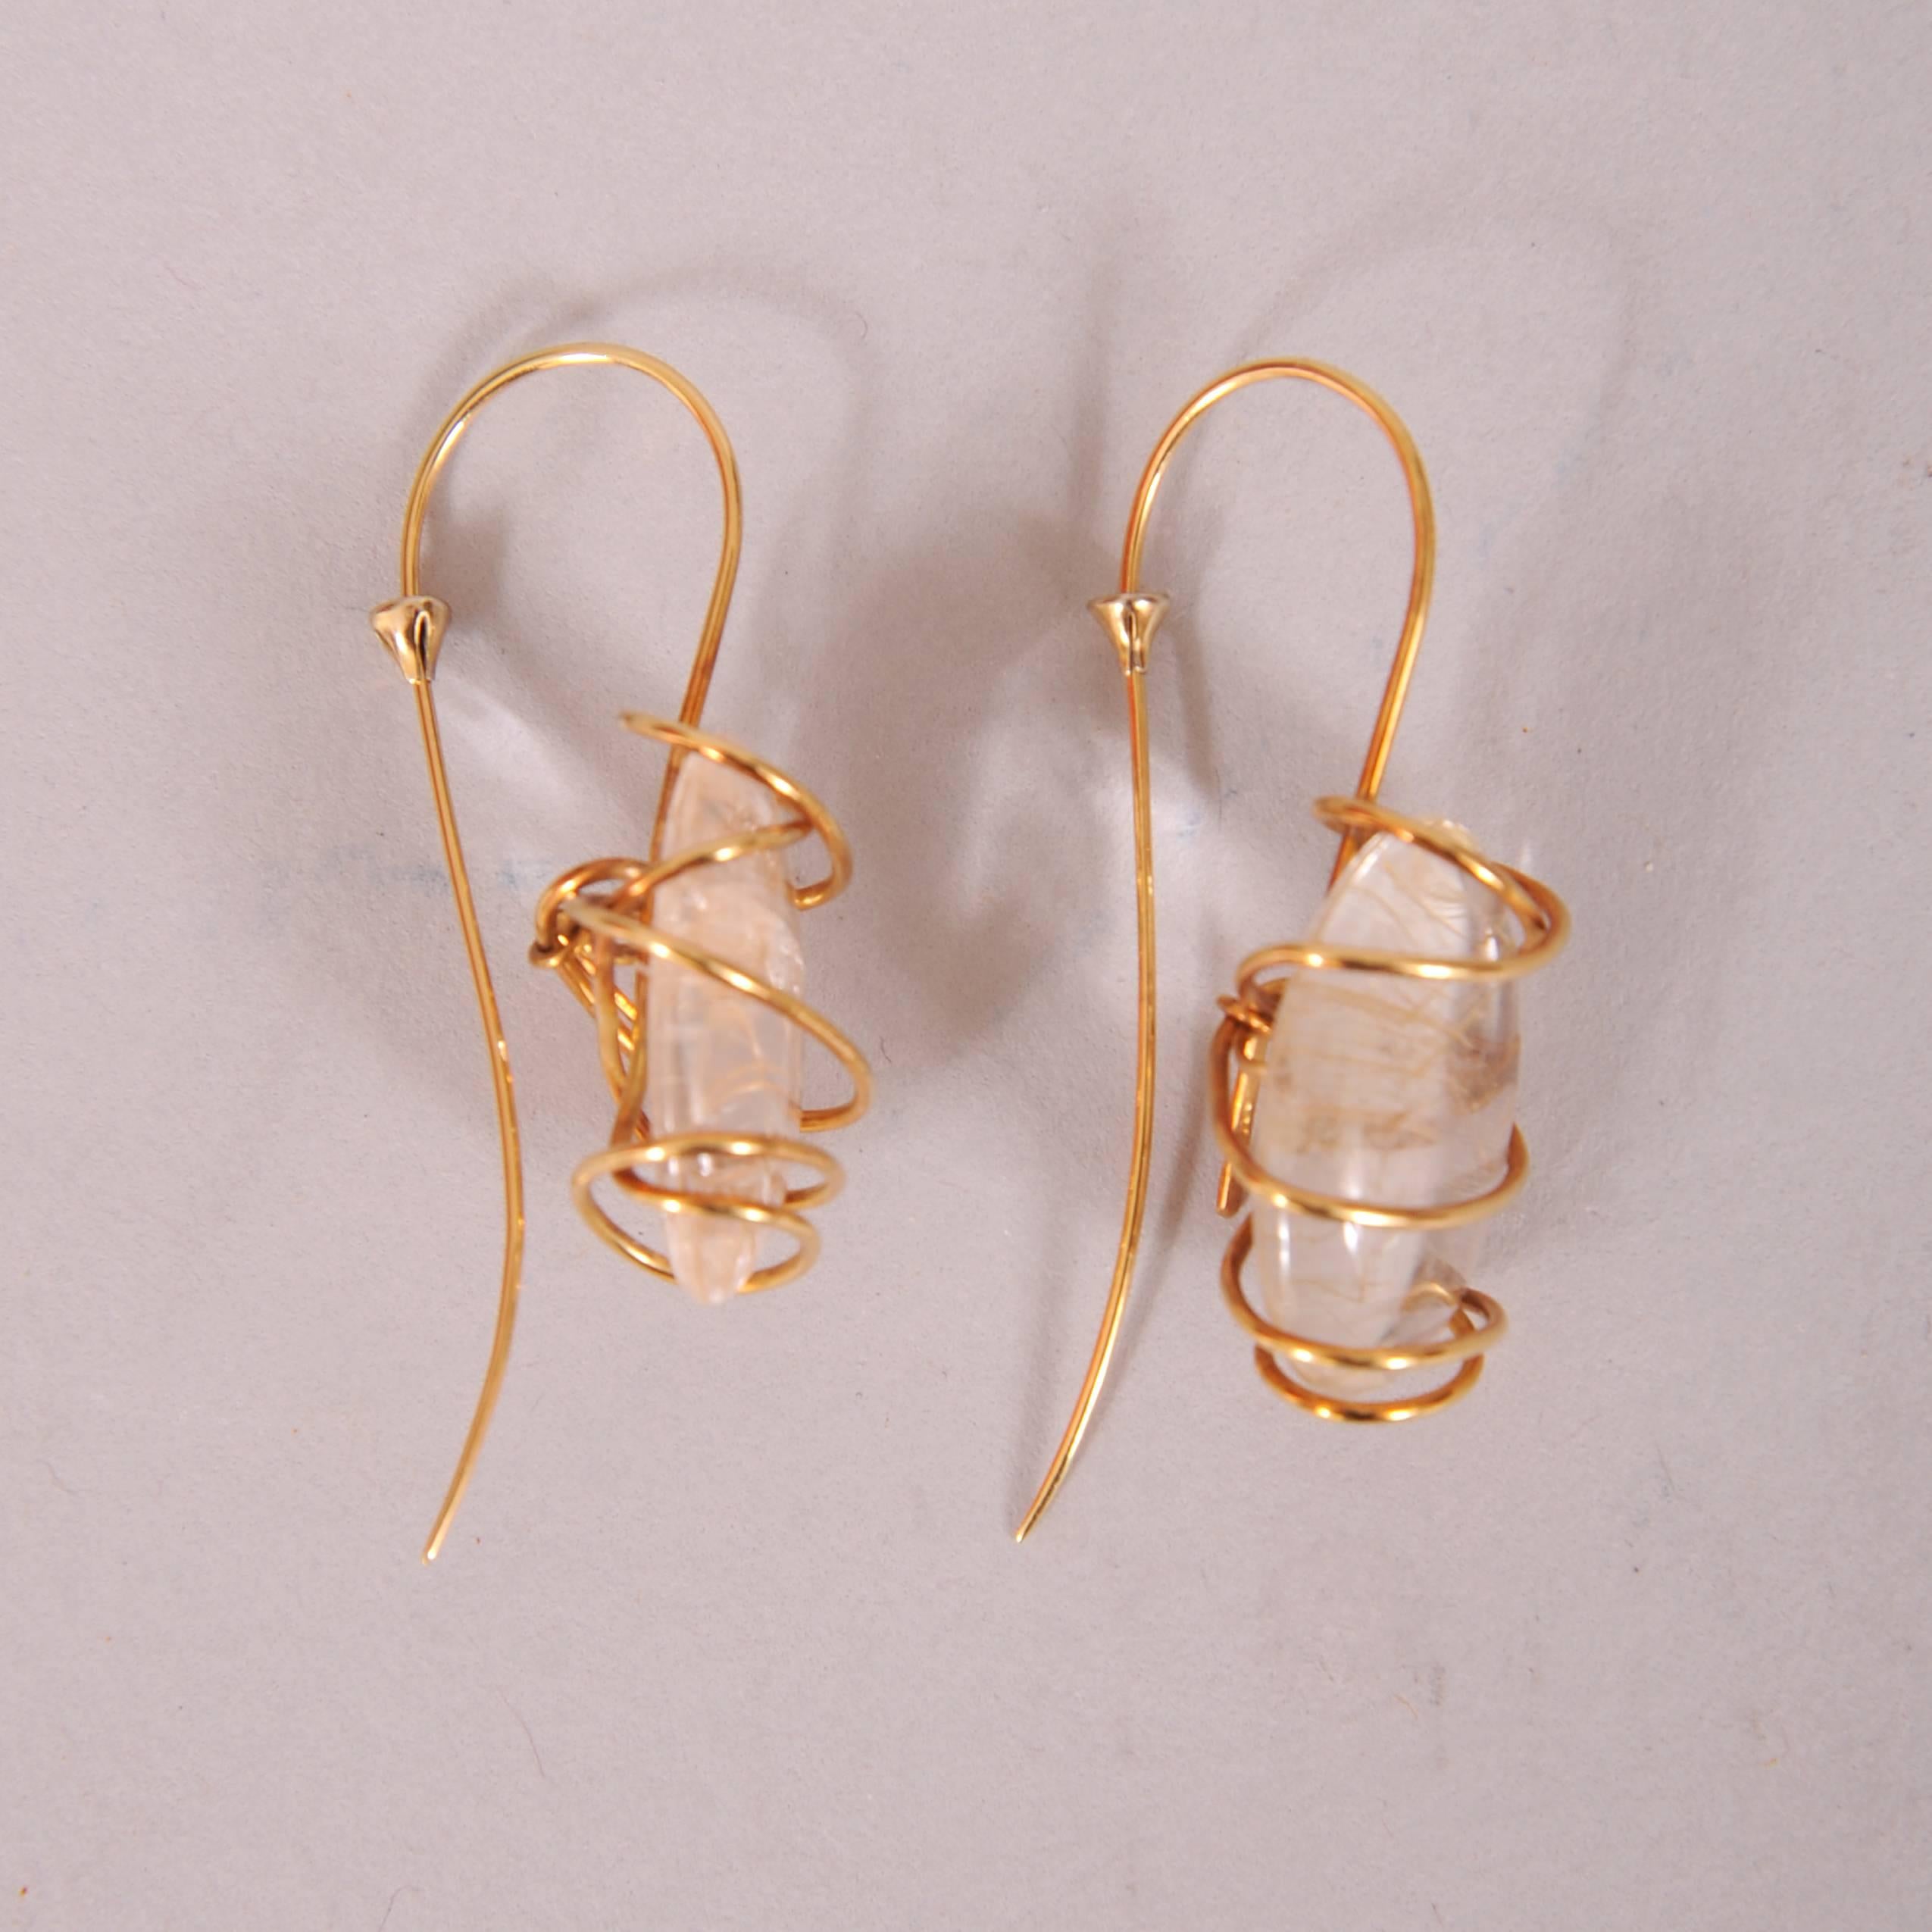 Gold bands are wrapped and twisted around these rutilated quartz stones creating a play on the gold streaks seen in the quartz. The earrings have an elegant and timeless modern look as designed by the legendary model, muse and designer Tina Chow.